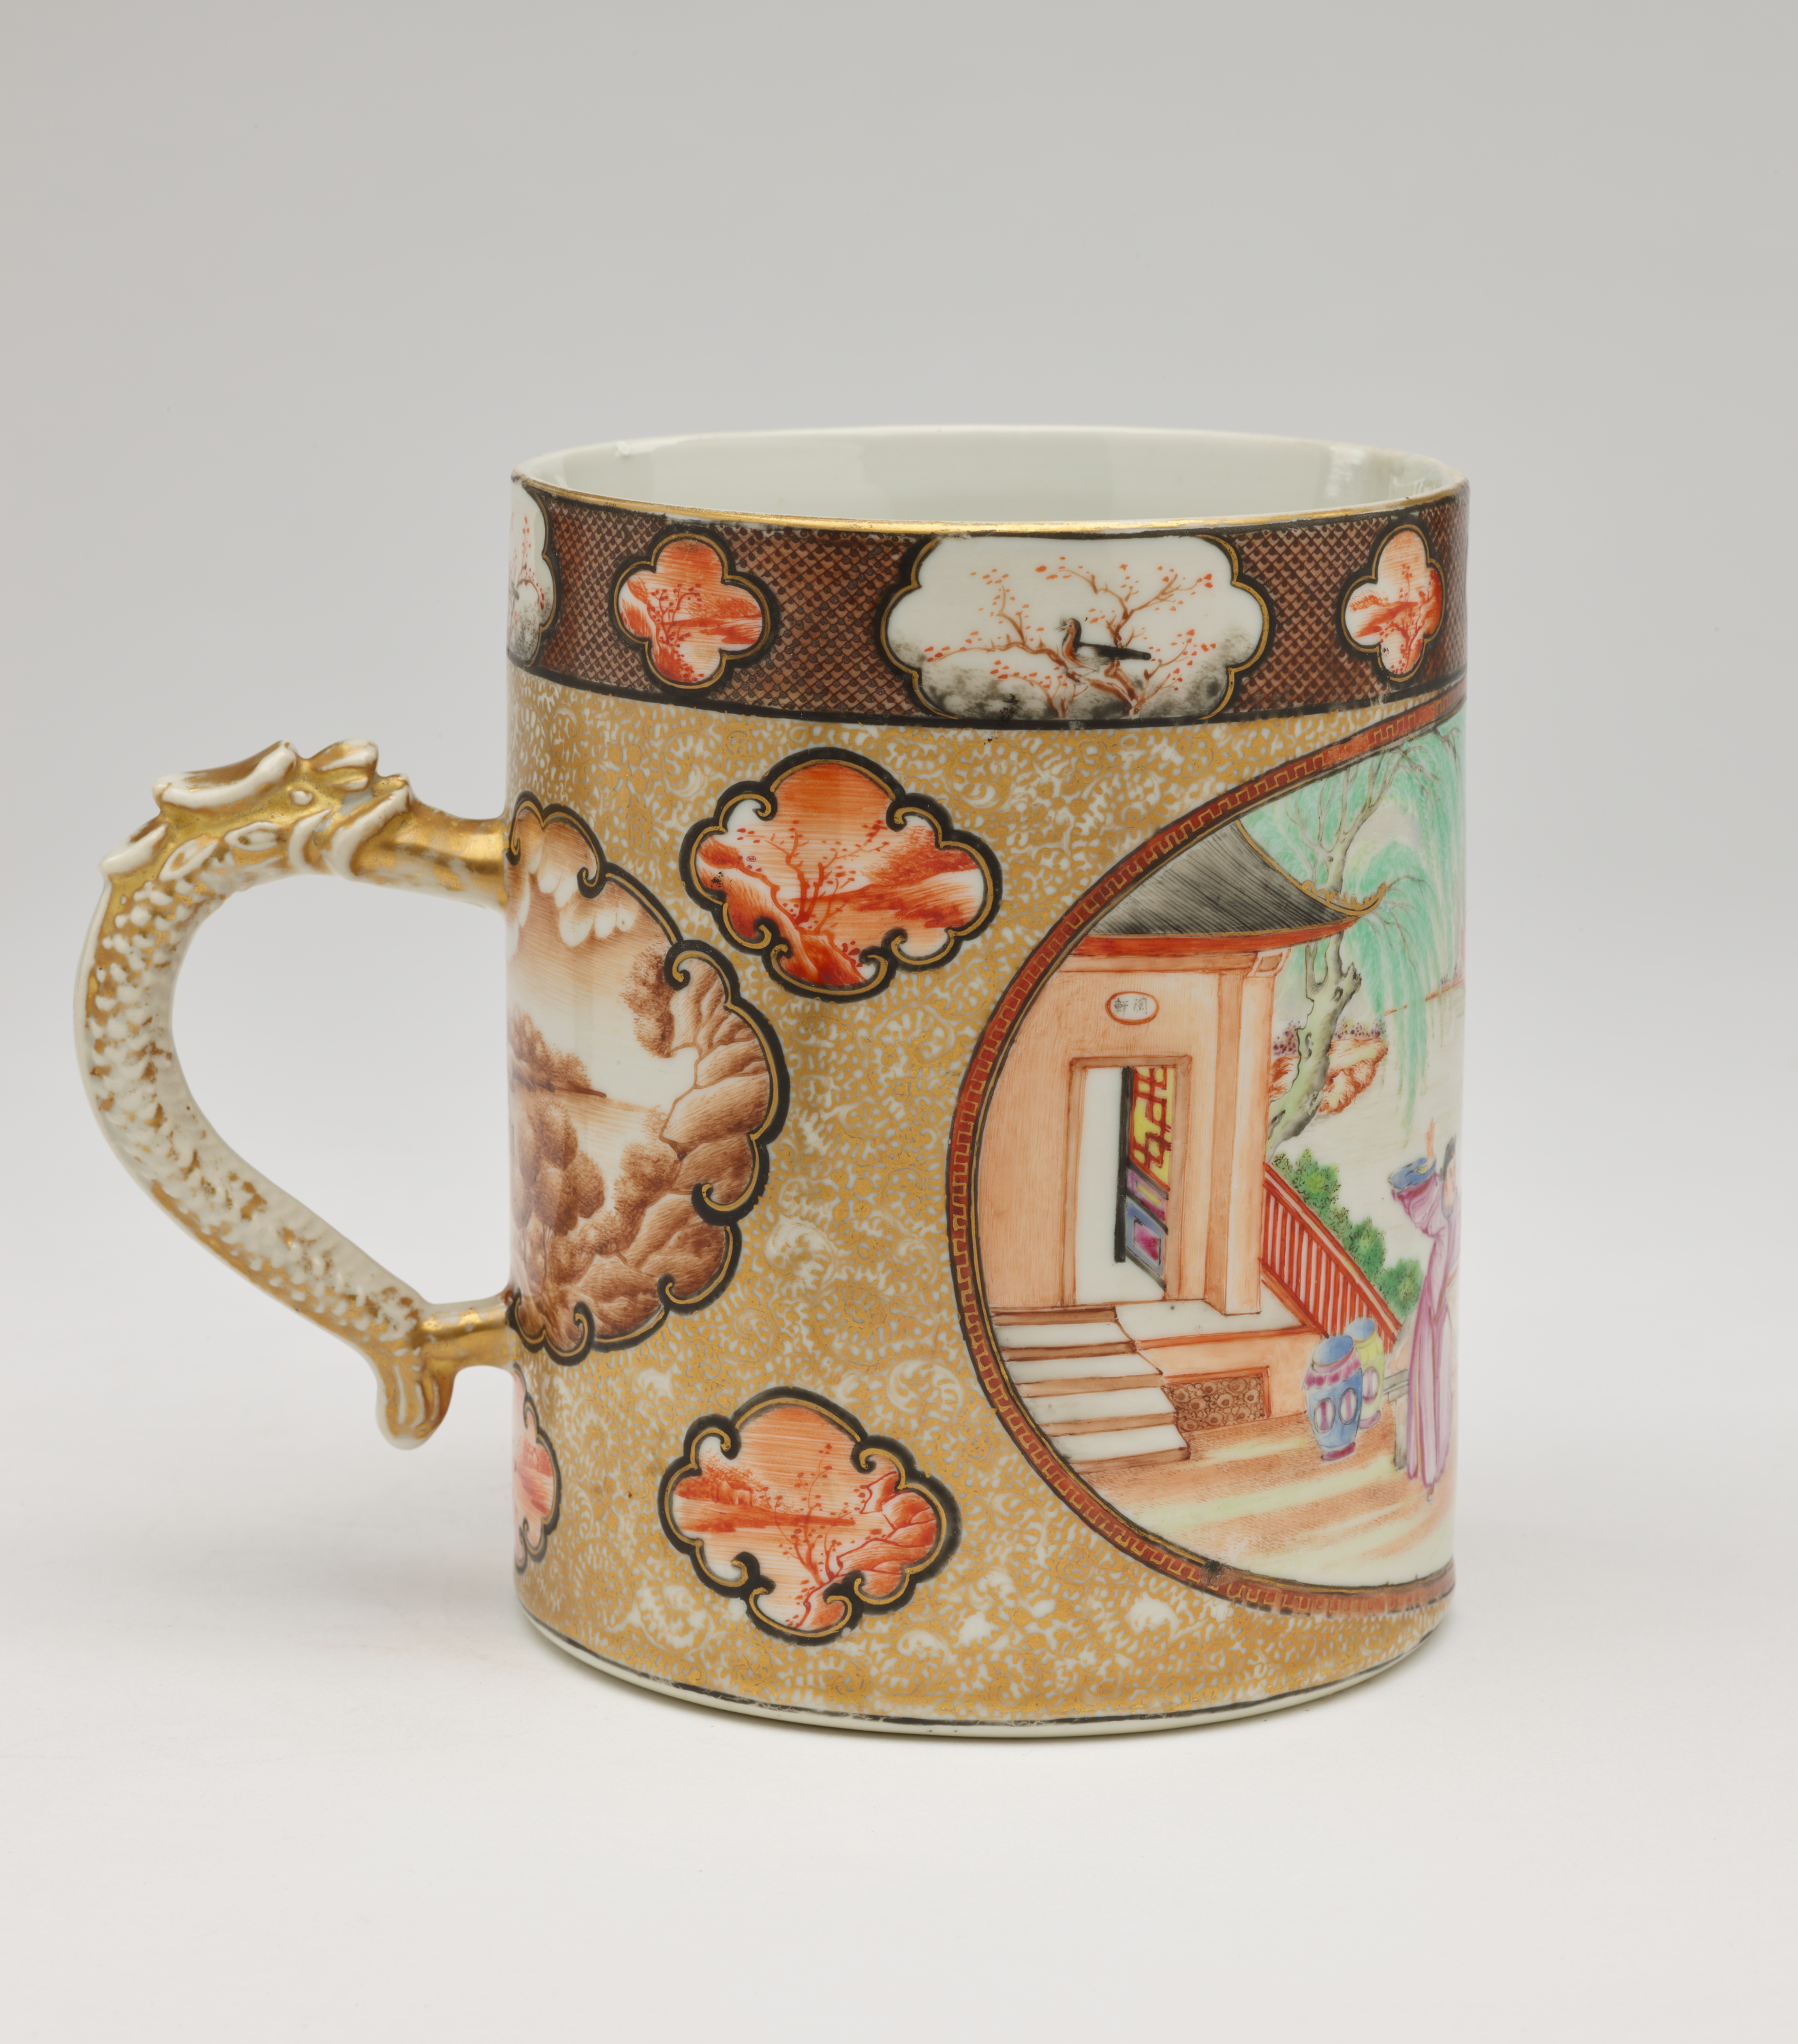 /A%20porcelain%20tankard%20with%20a%20handle%20that%20has%20delicate%20enamel%20and%20gilded%20decorations.